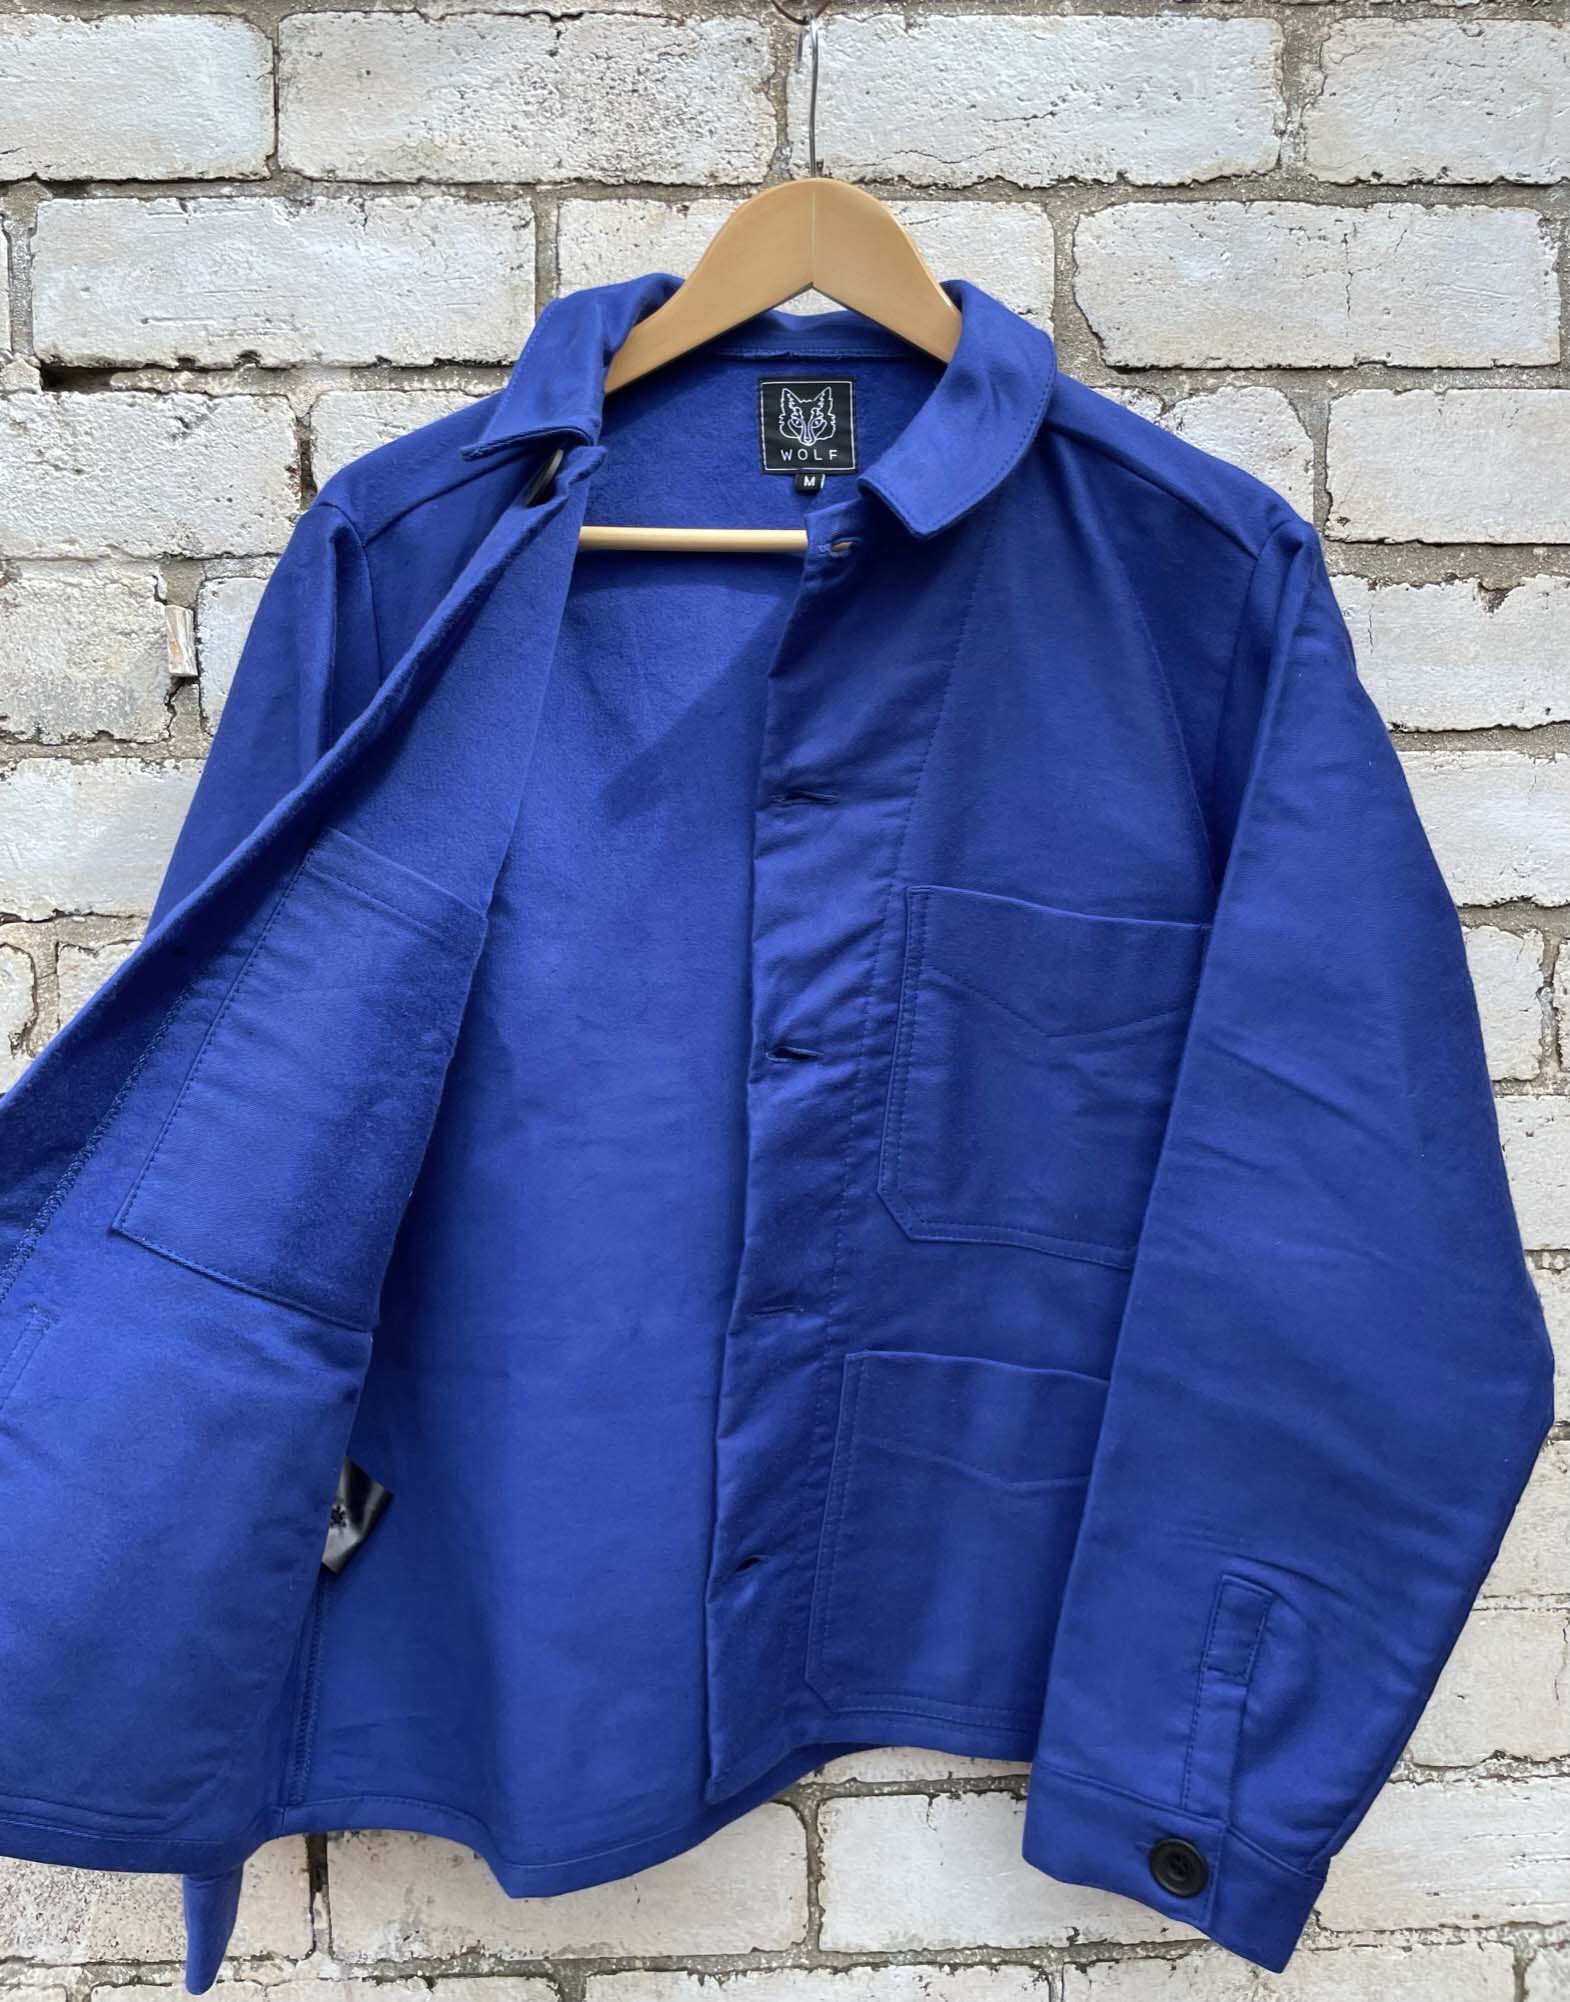 French Military Work Jacket 50s-60s | camillevieraservices.com